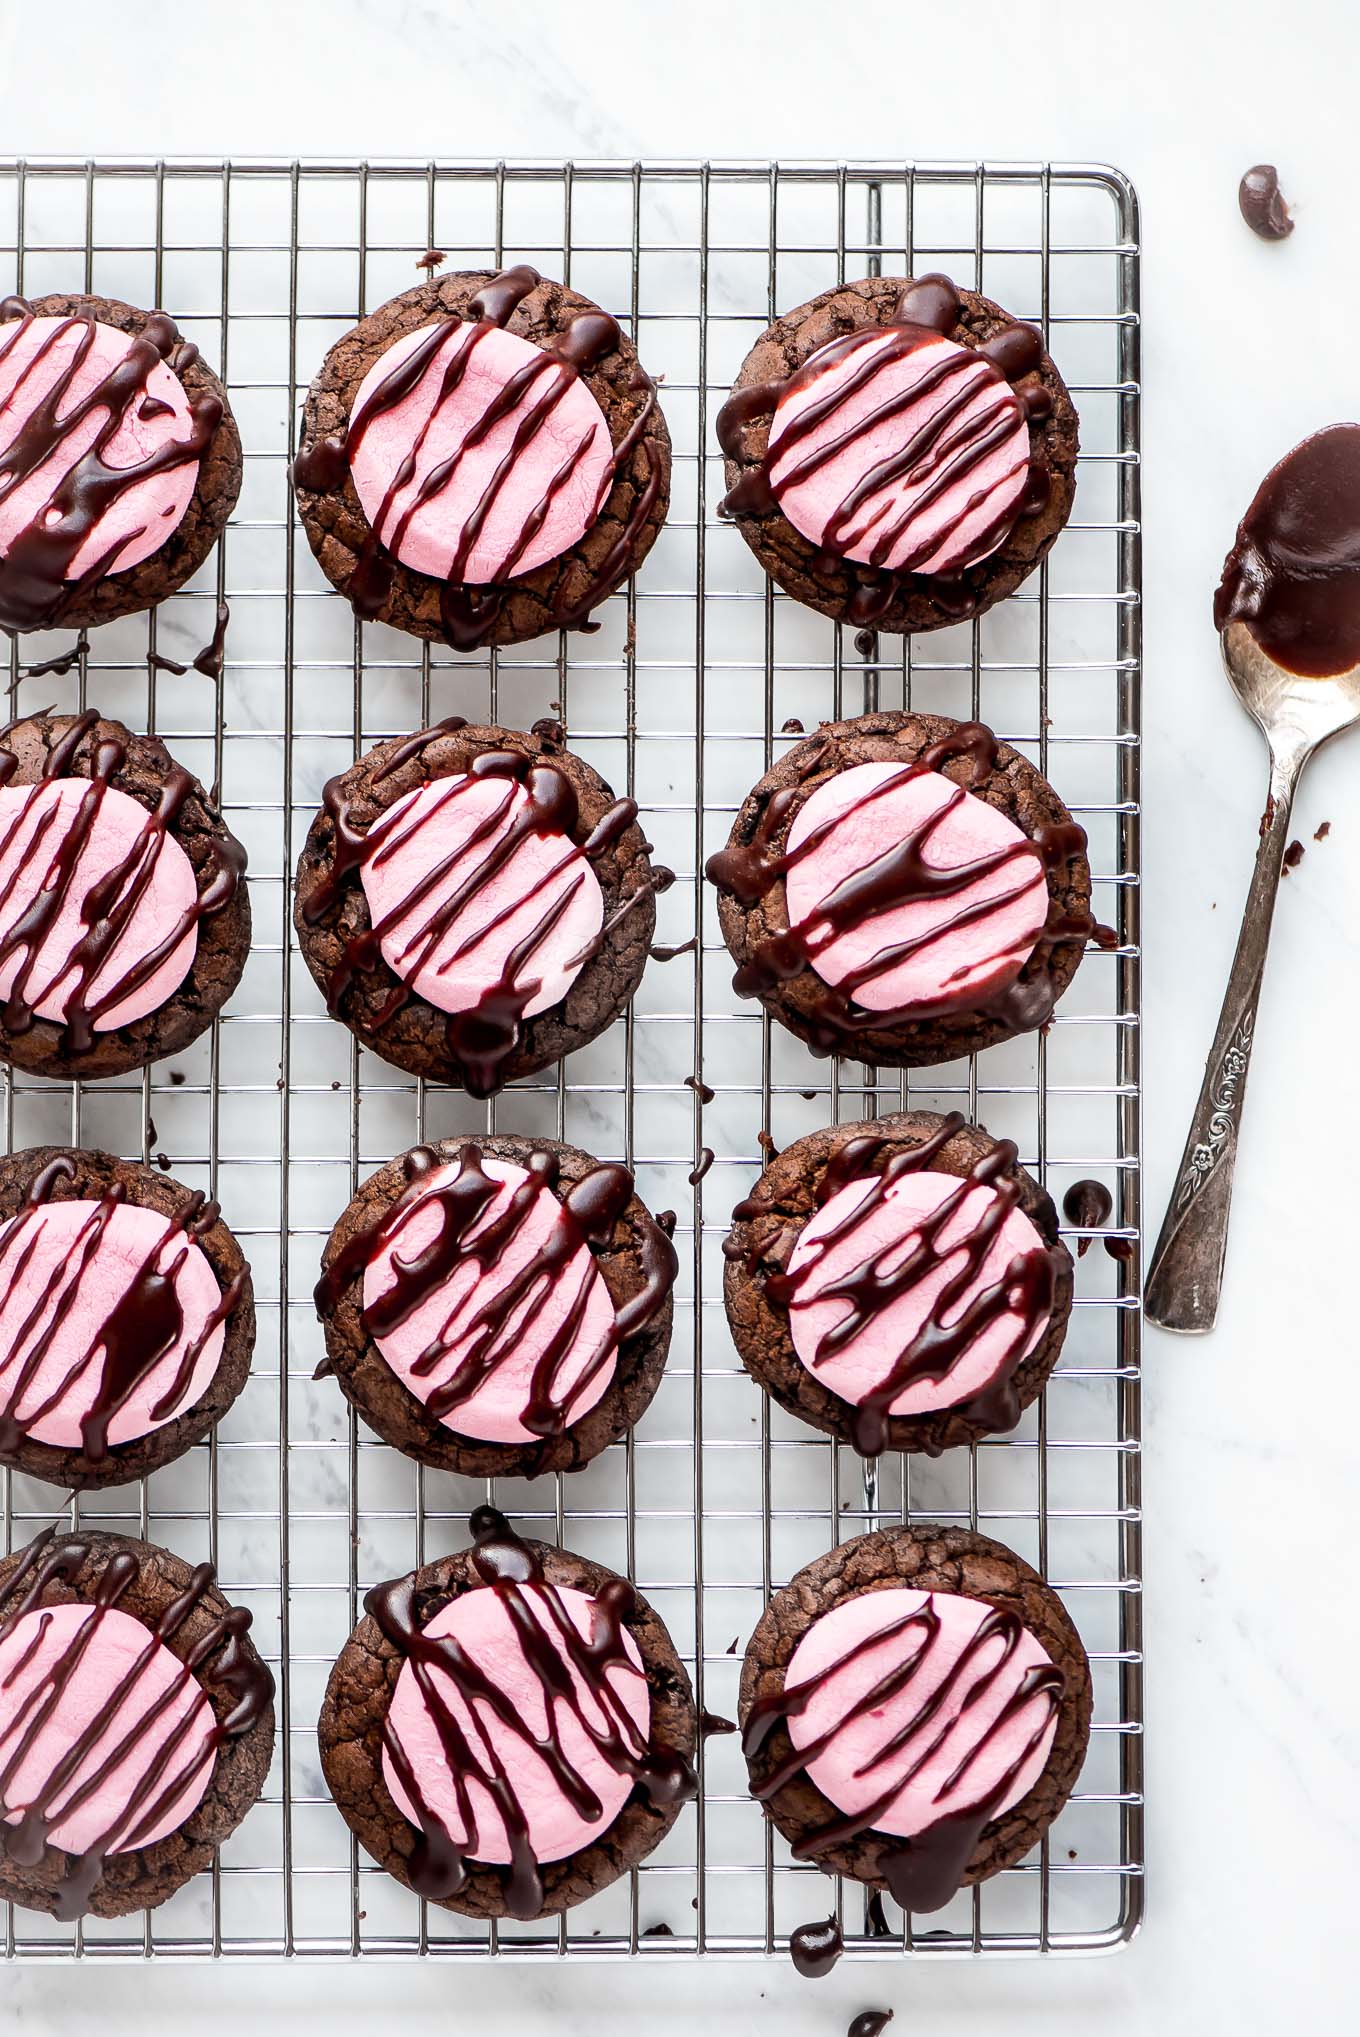 Pink Chocolate Marshmallow Cookies drizzled with chocolate icing, sitting on a cooling rack.